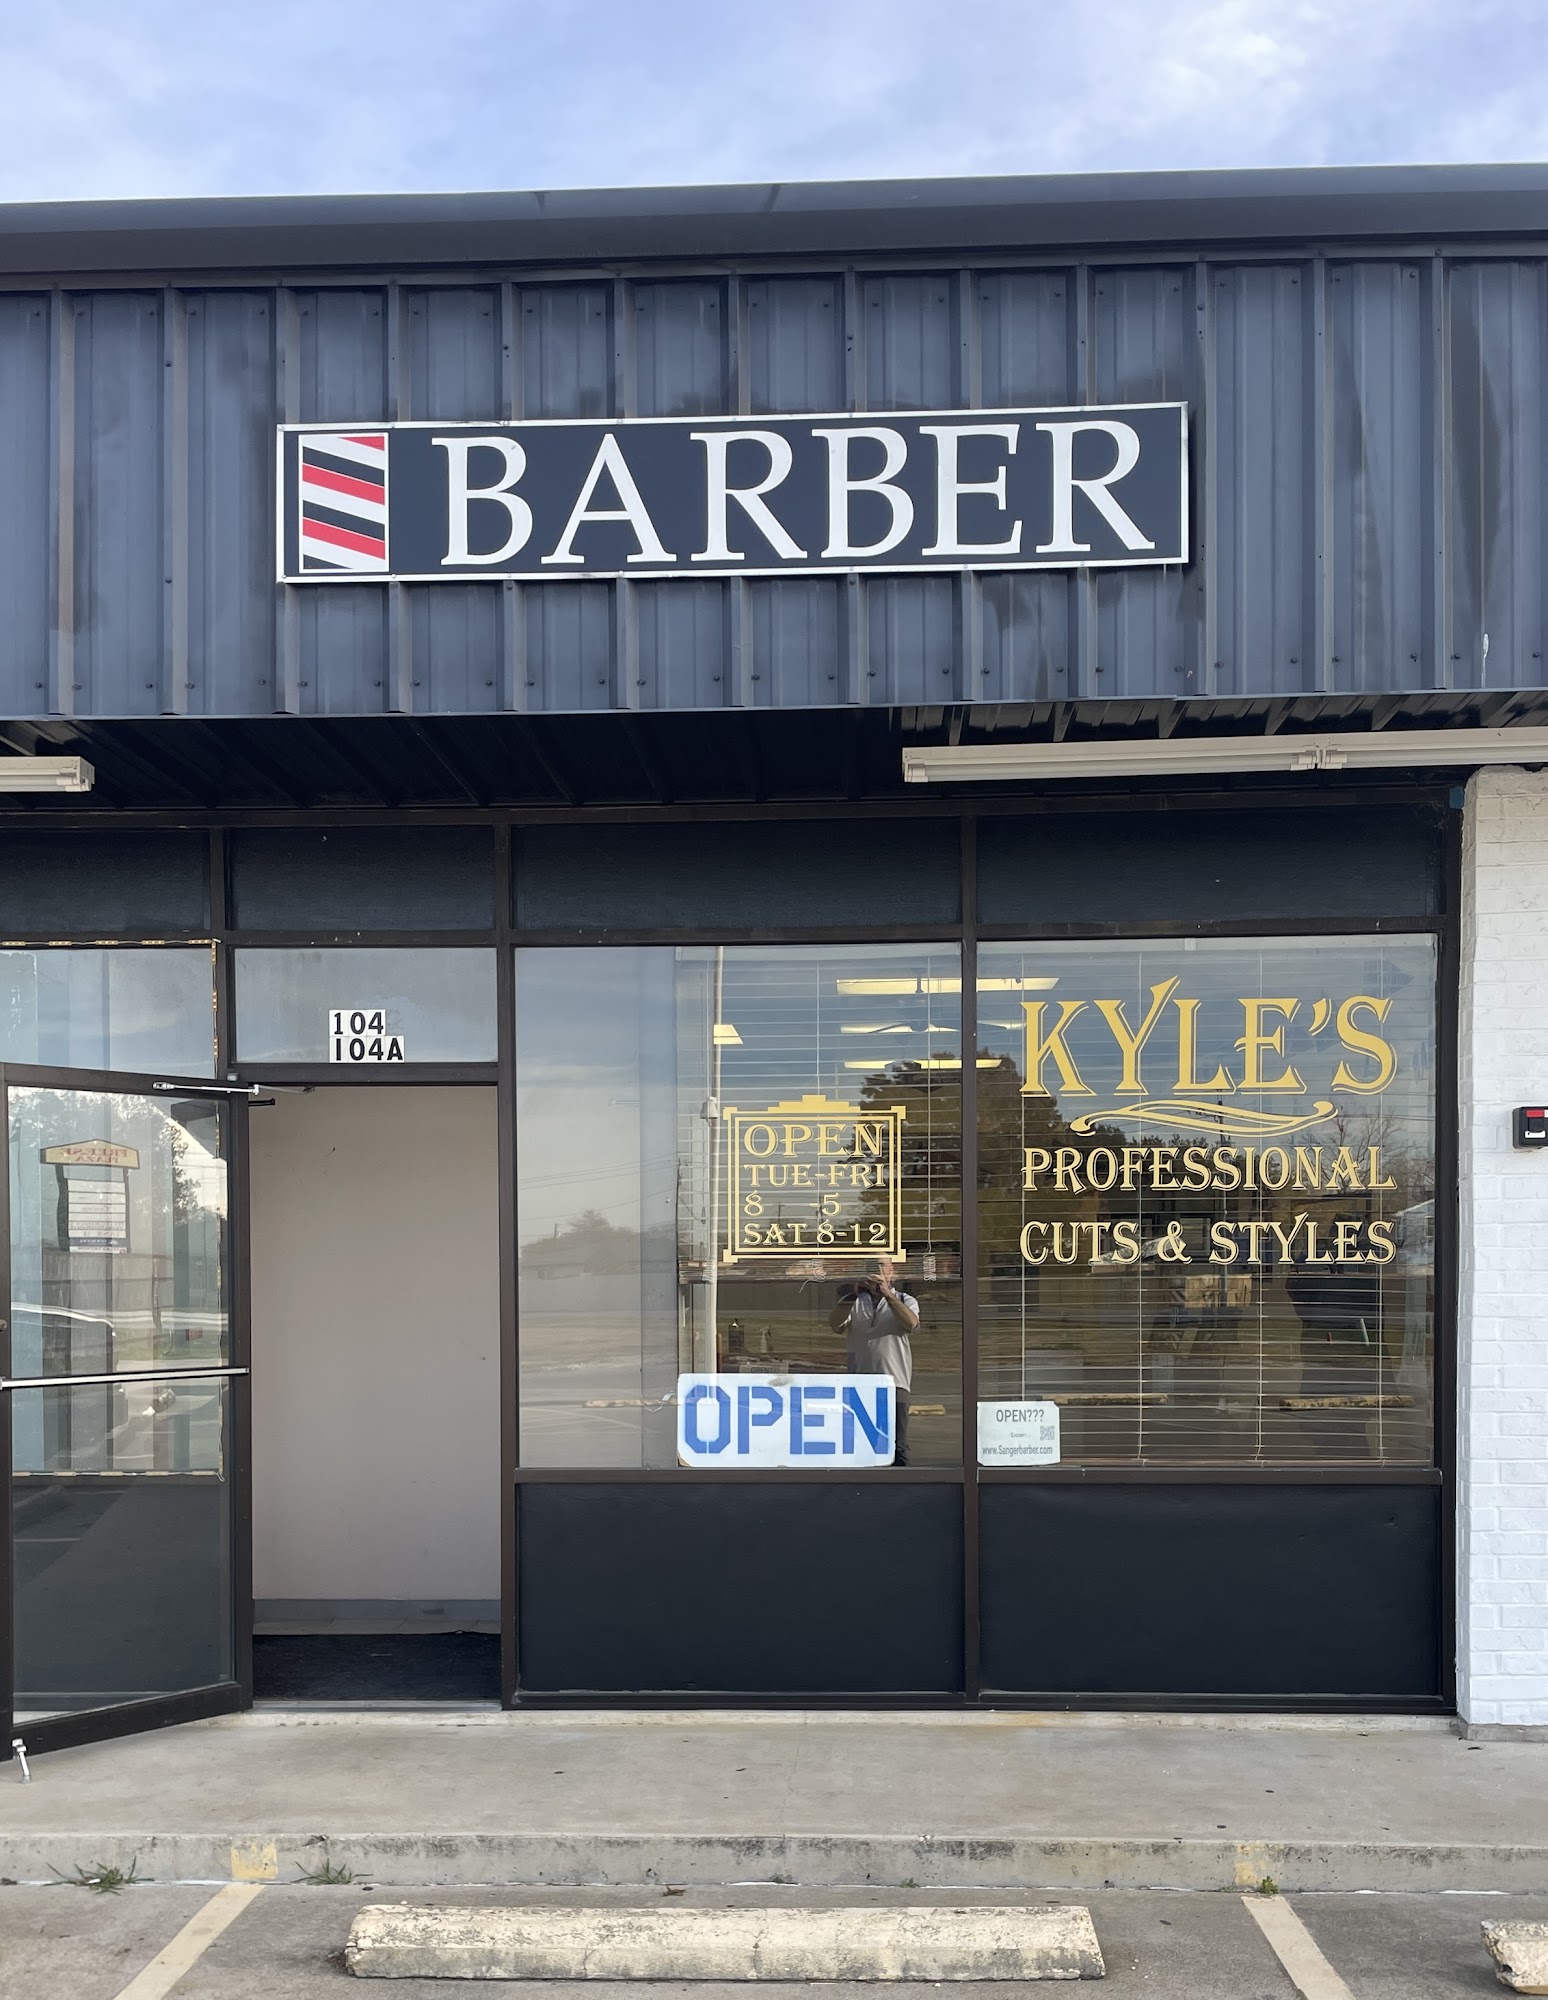 Kyle's Professional Cuts & Styles 904 S 5th St a, Sanger Texas 76266